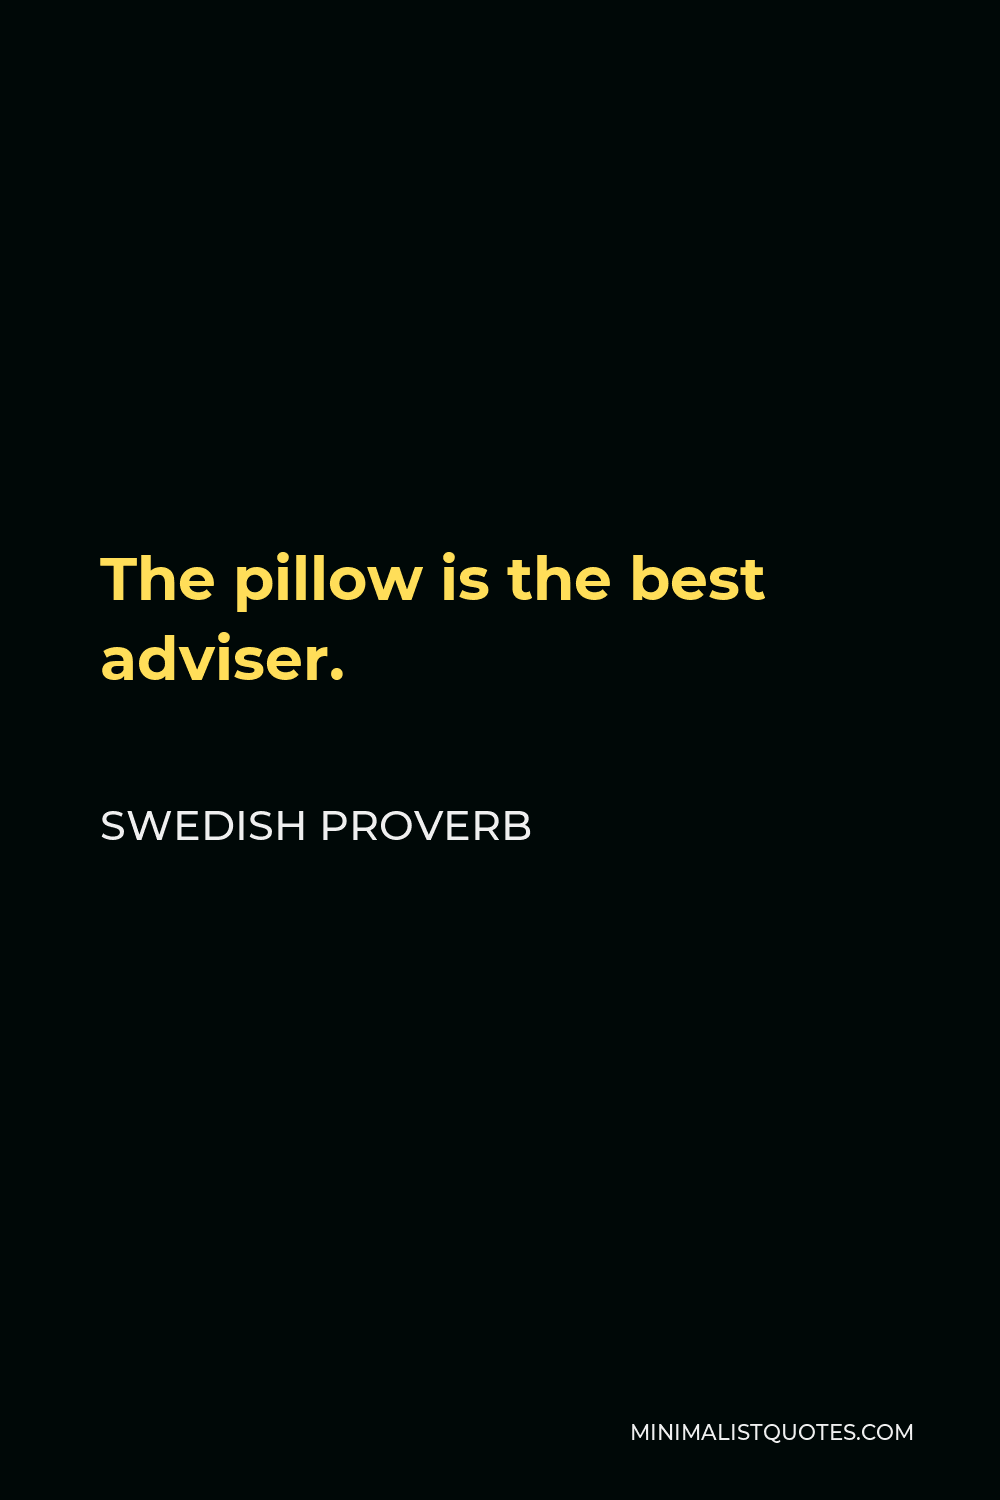 Swedish Proverb Quote - The pillow is the best adviser.